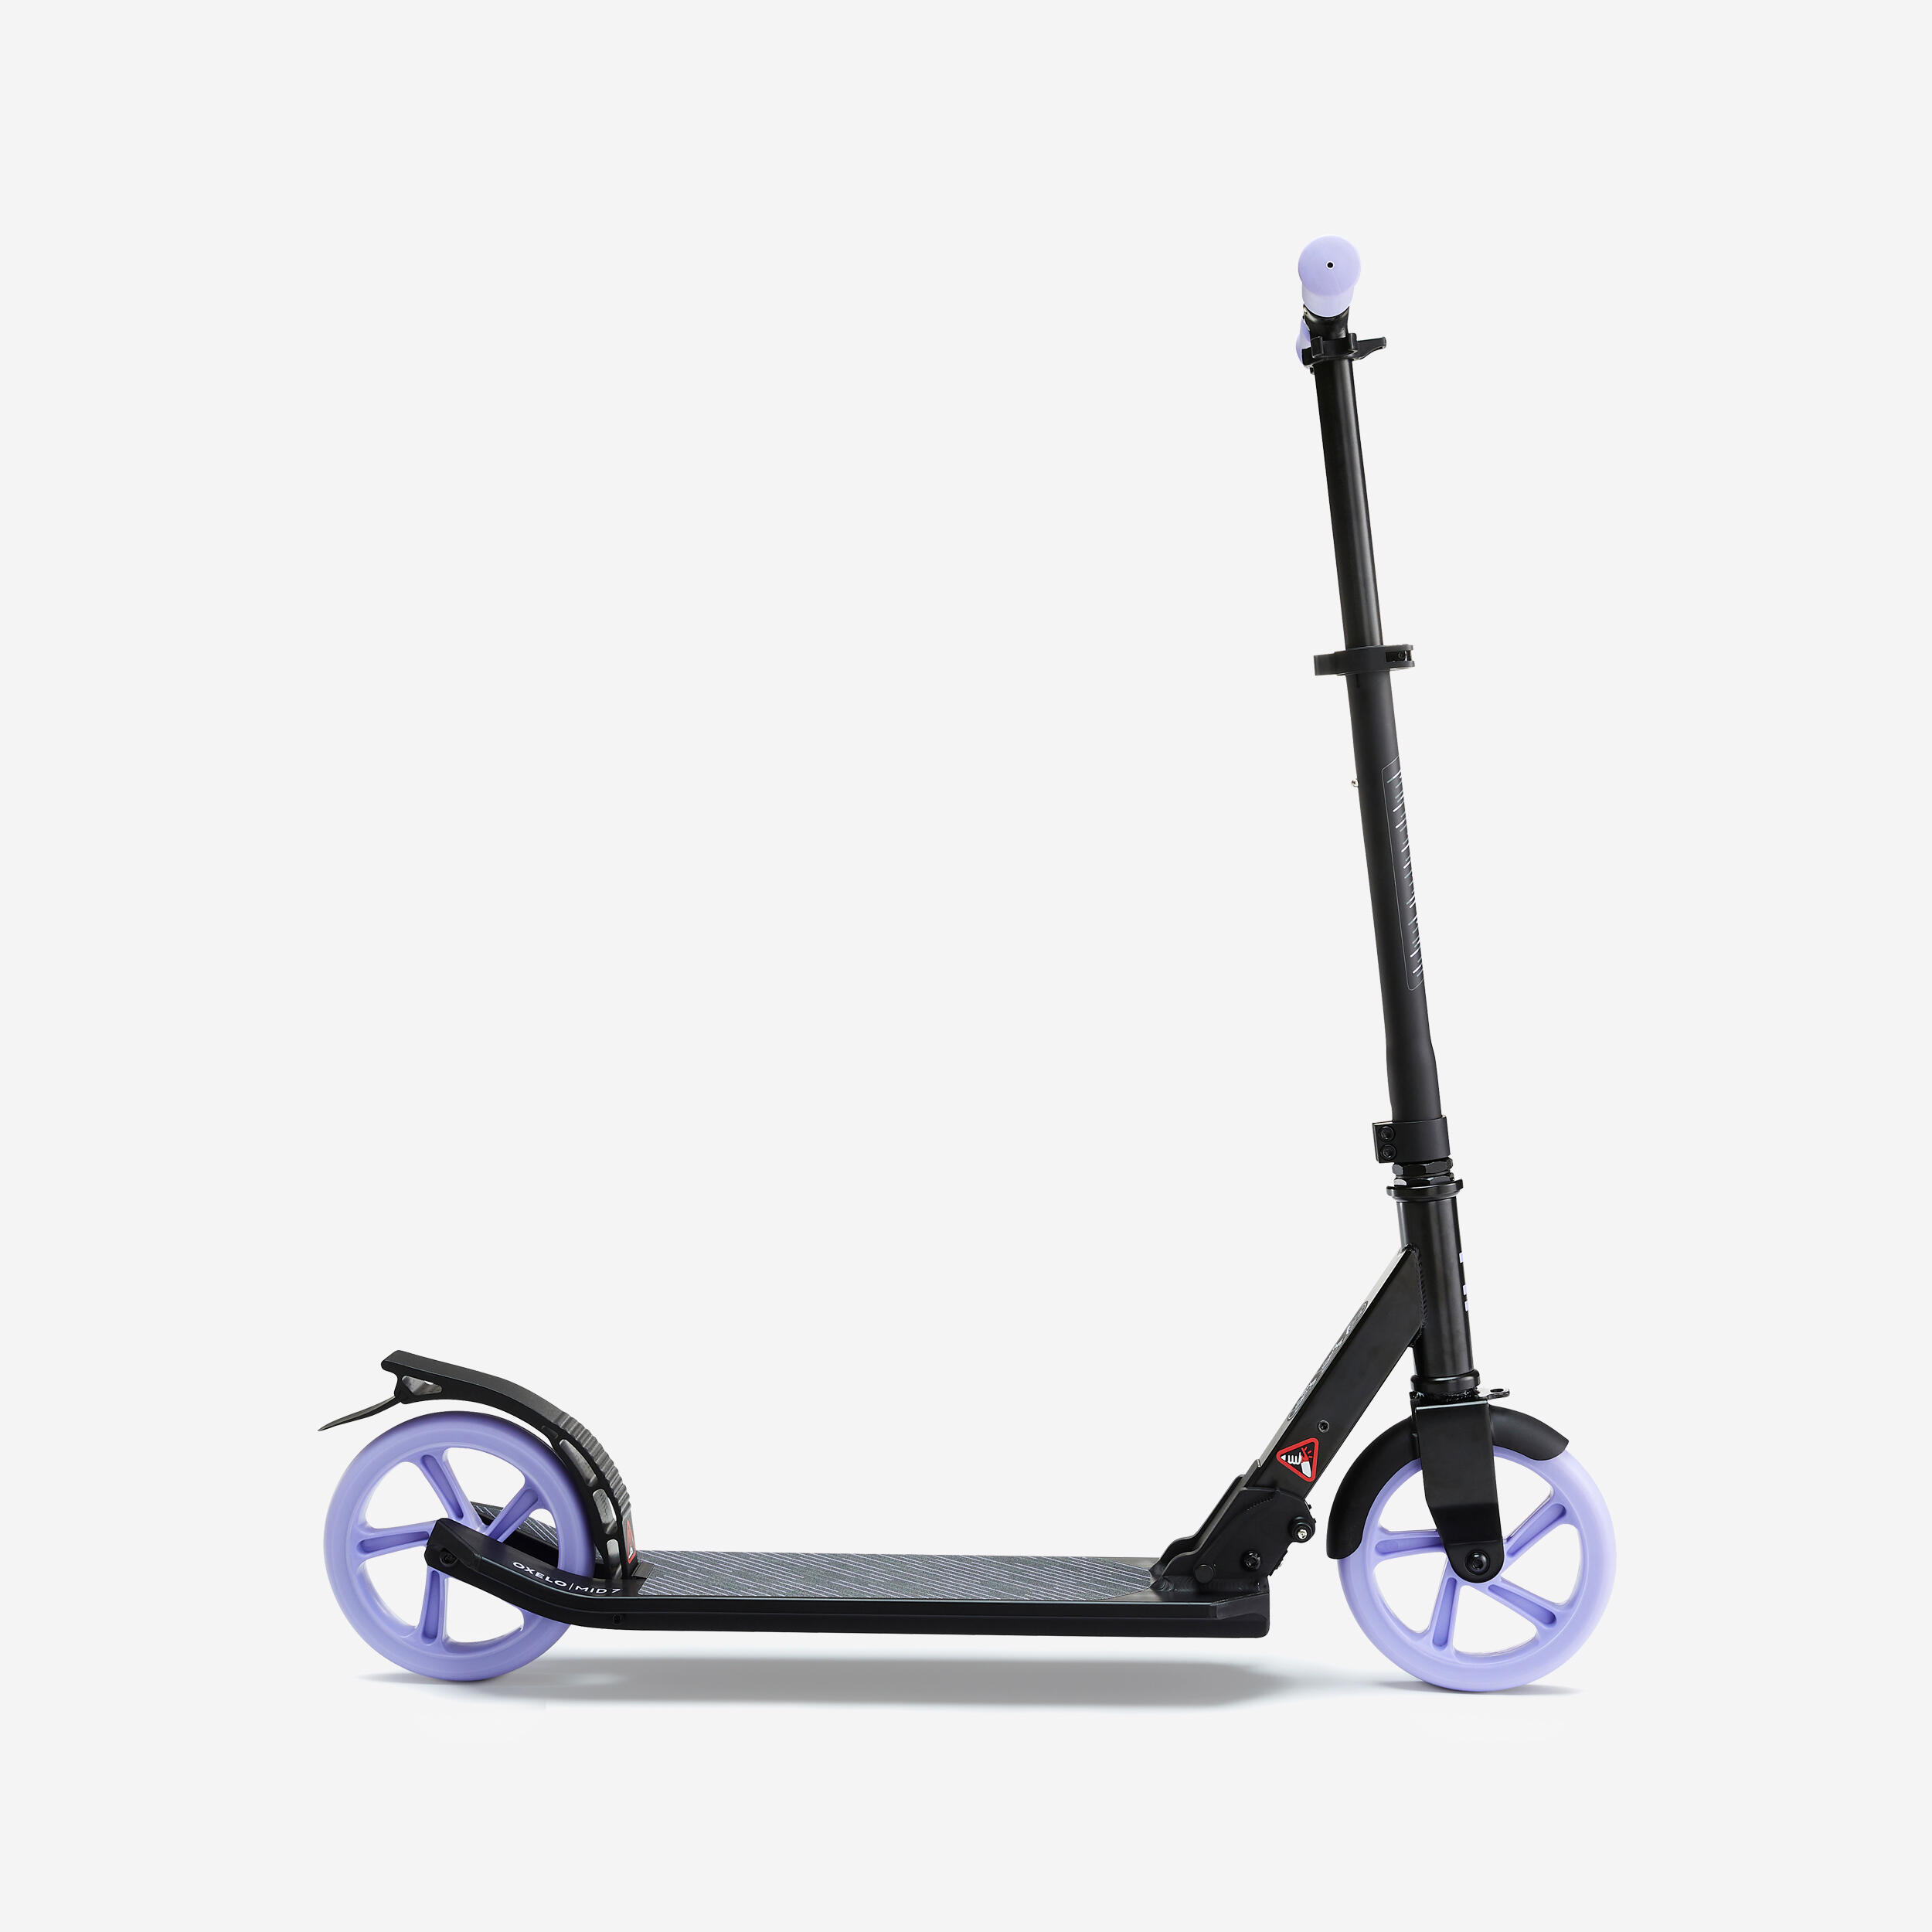 Scooter with Kickstand MID 7 - Black/Lavender 8/9